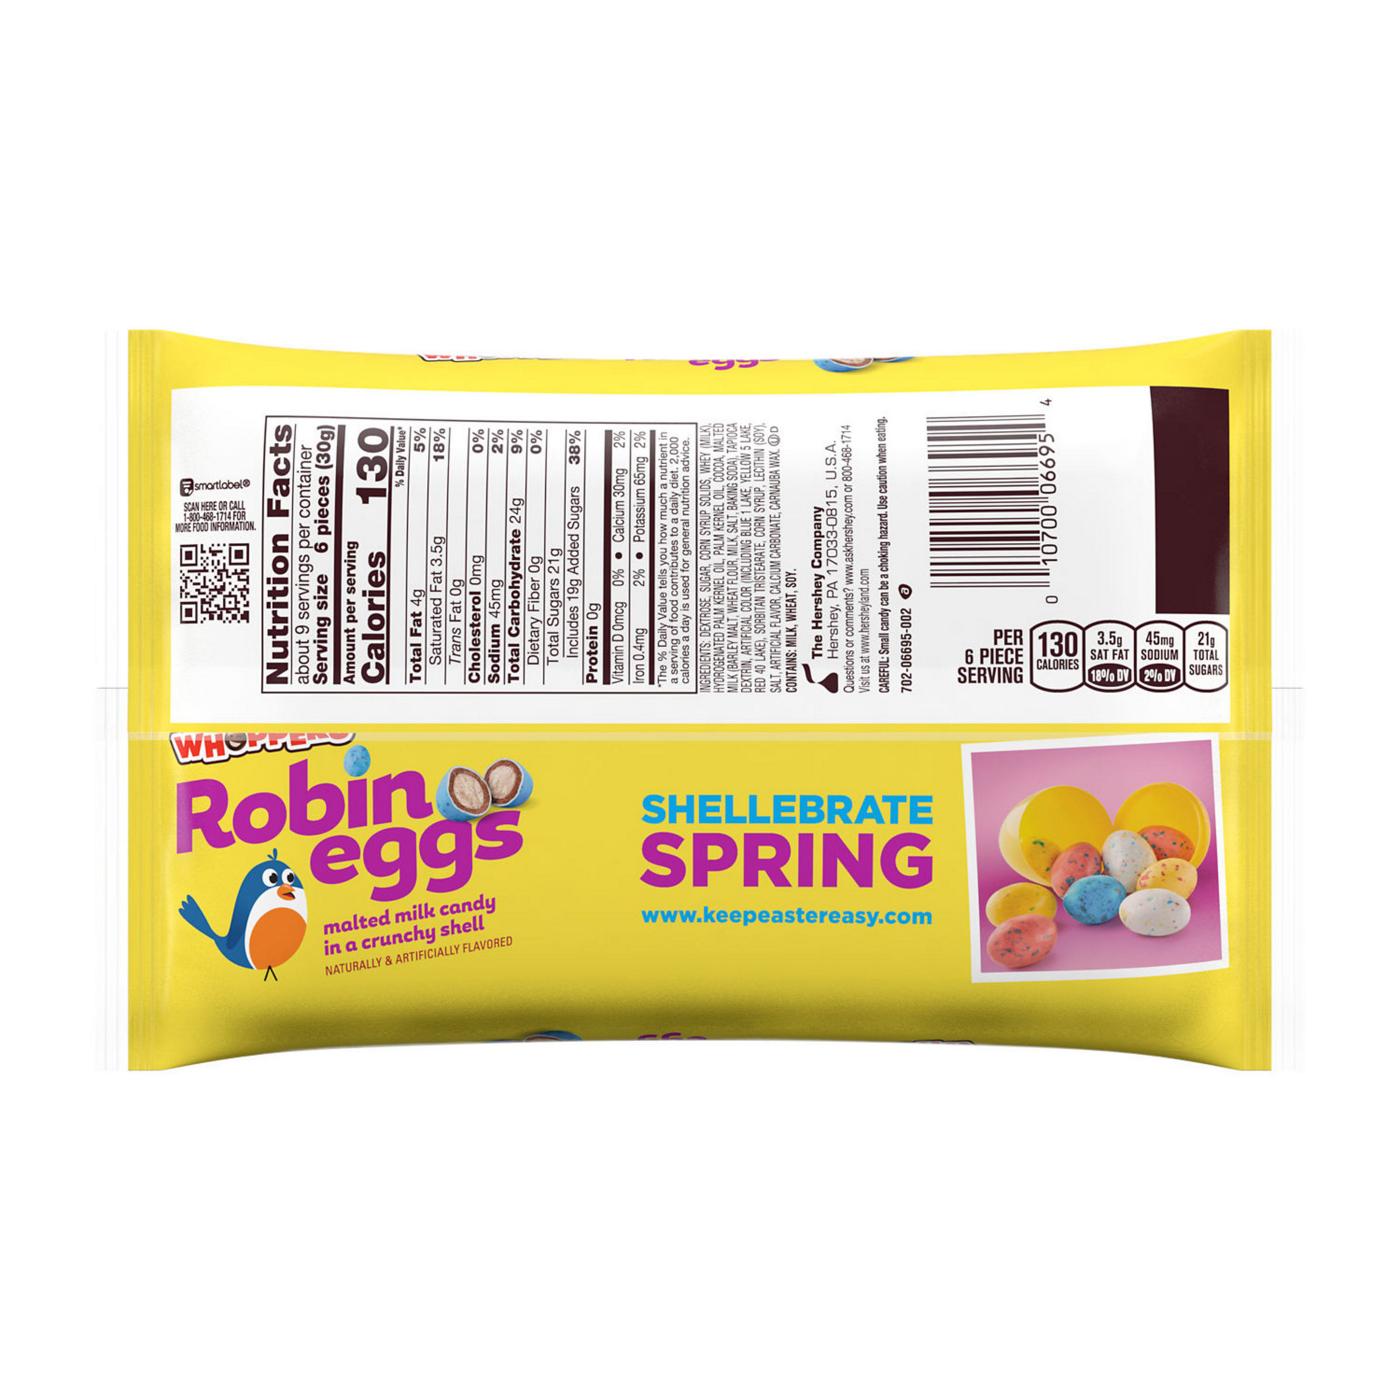 Whoppers Robin Eggs Malted Milk Balls Easter Candy; image 6 of 7